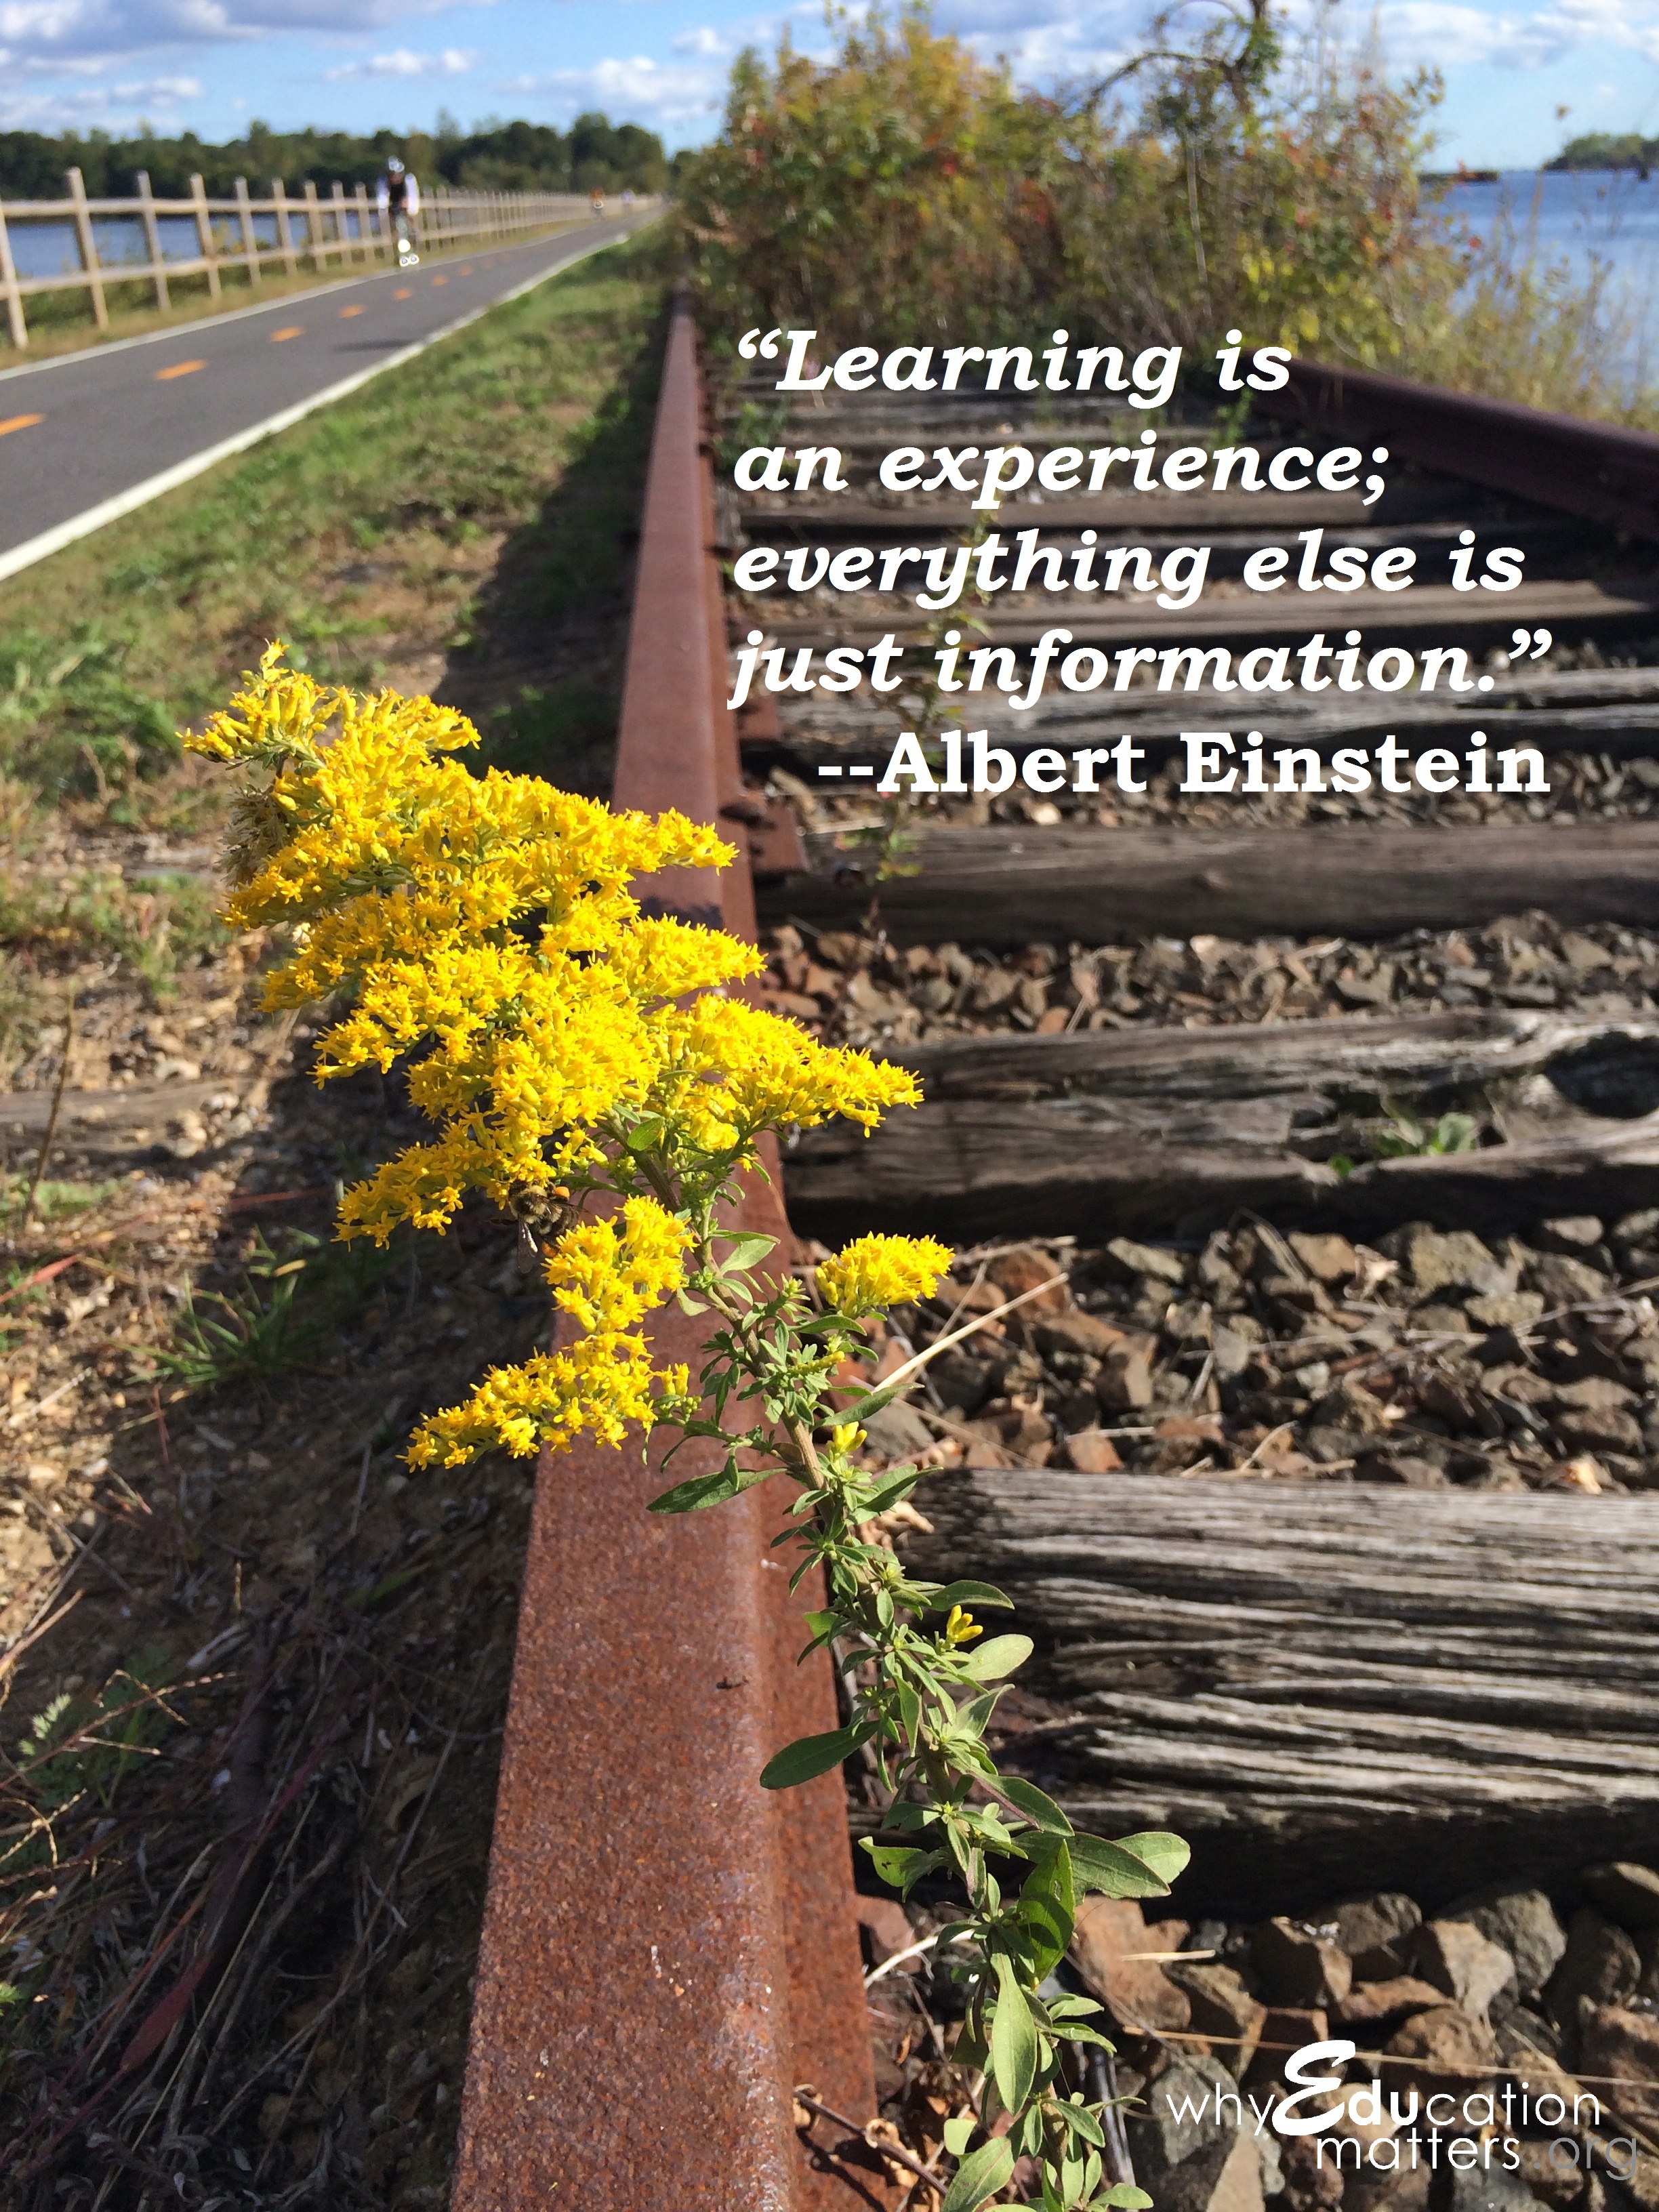 “Learning is an experience; everything else is just information.” --Albert Einstein